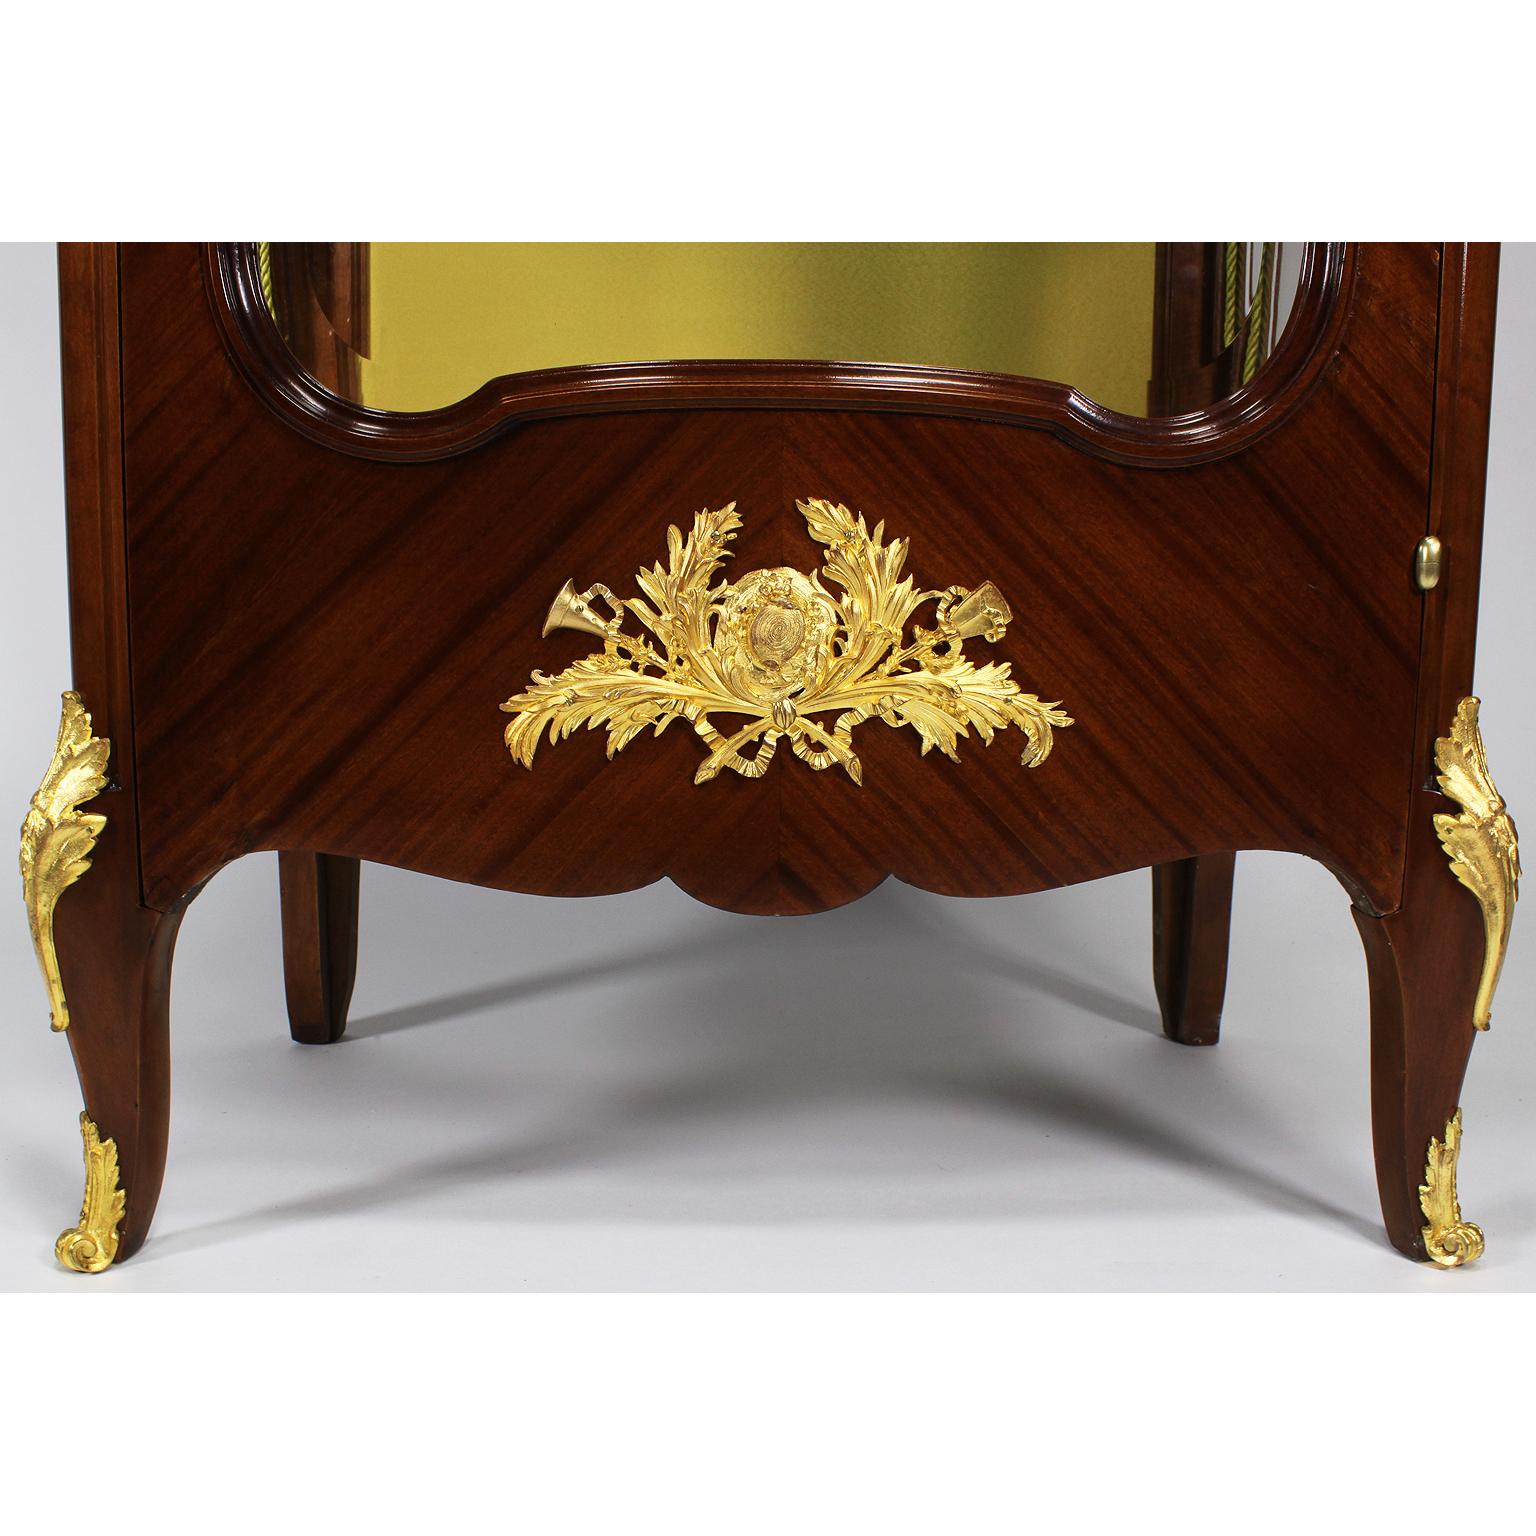 Fine French 19th-20th Century Louis XV Style Ormolu-Mounted Tulipwood Vitrine For Sale 3